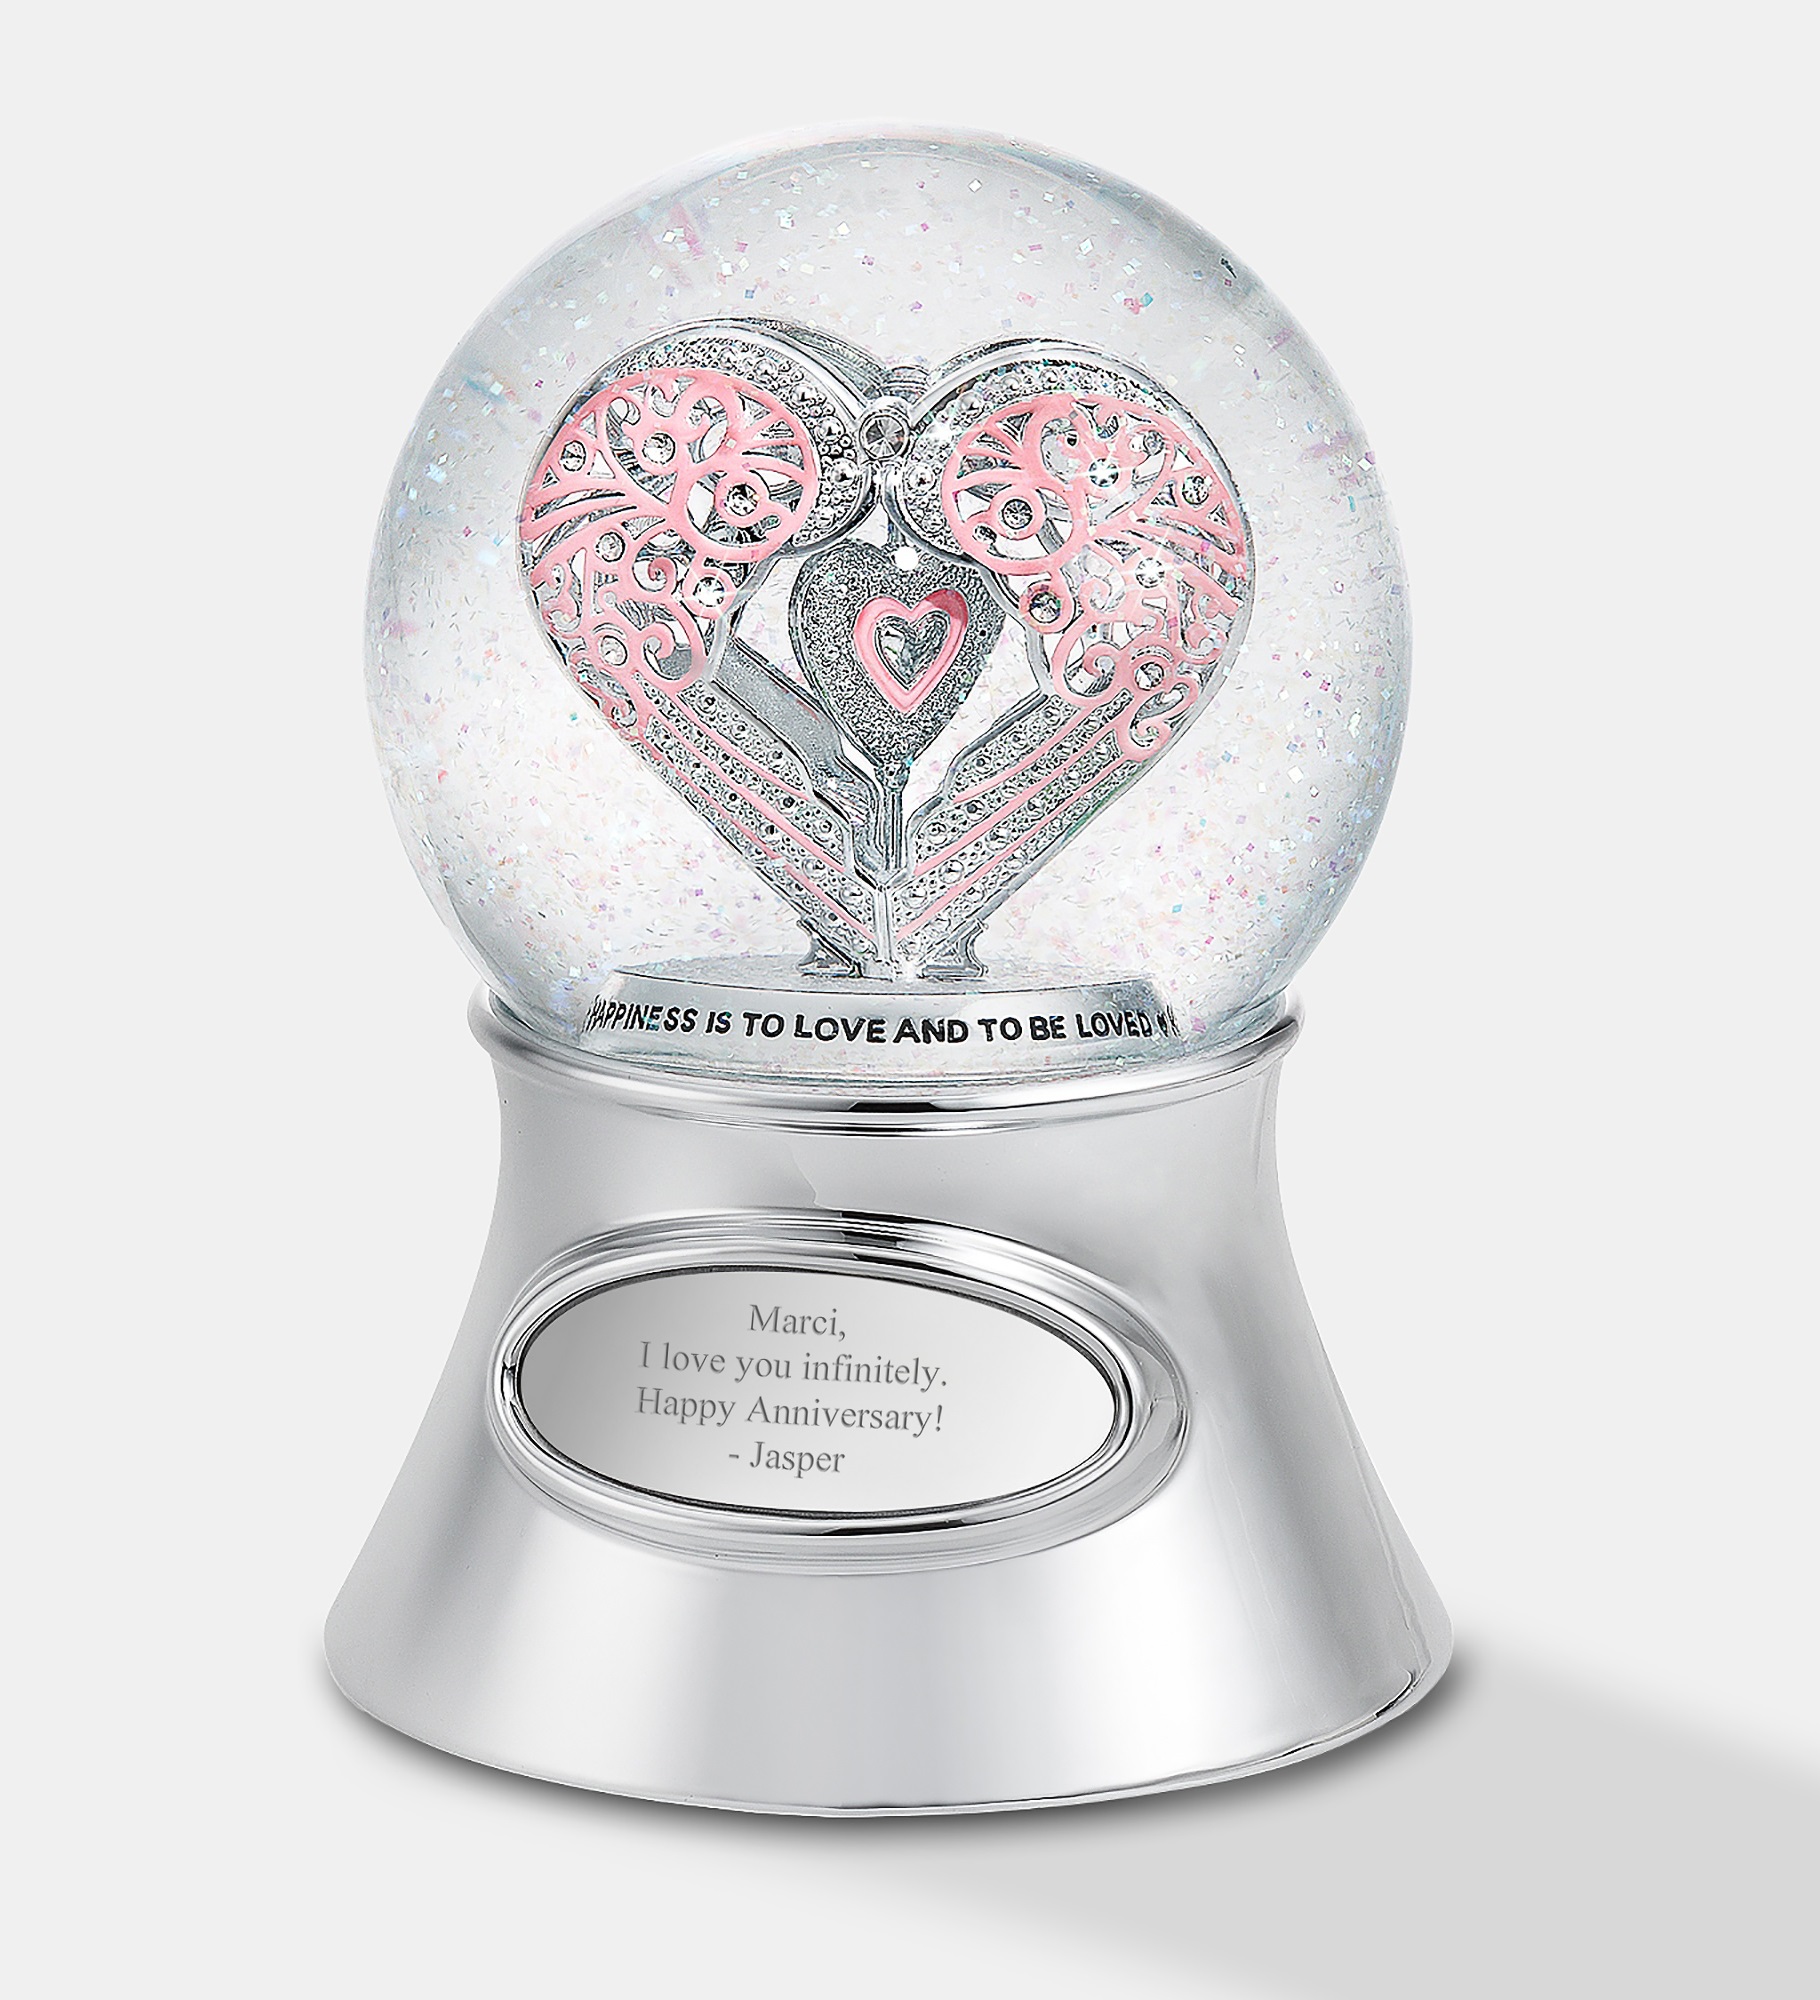  Engraved Say It With Love Heart Snow Globe